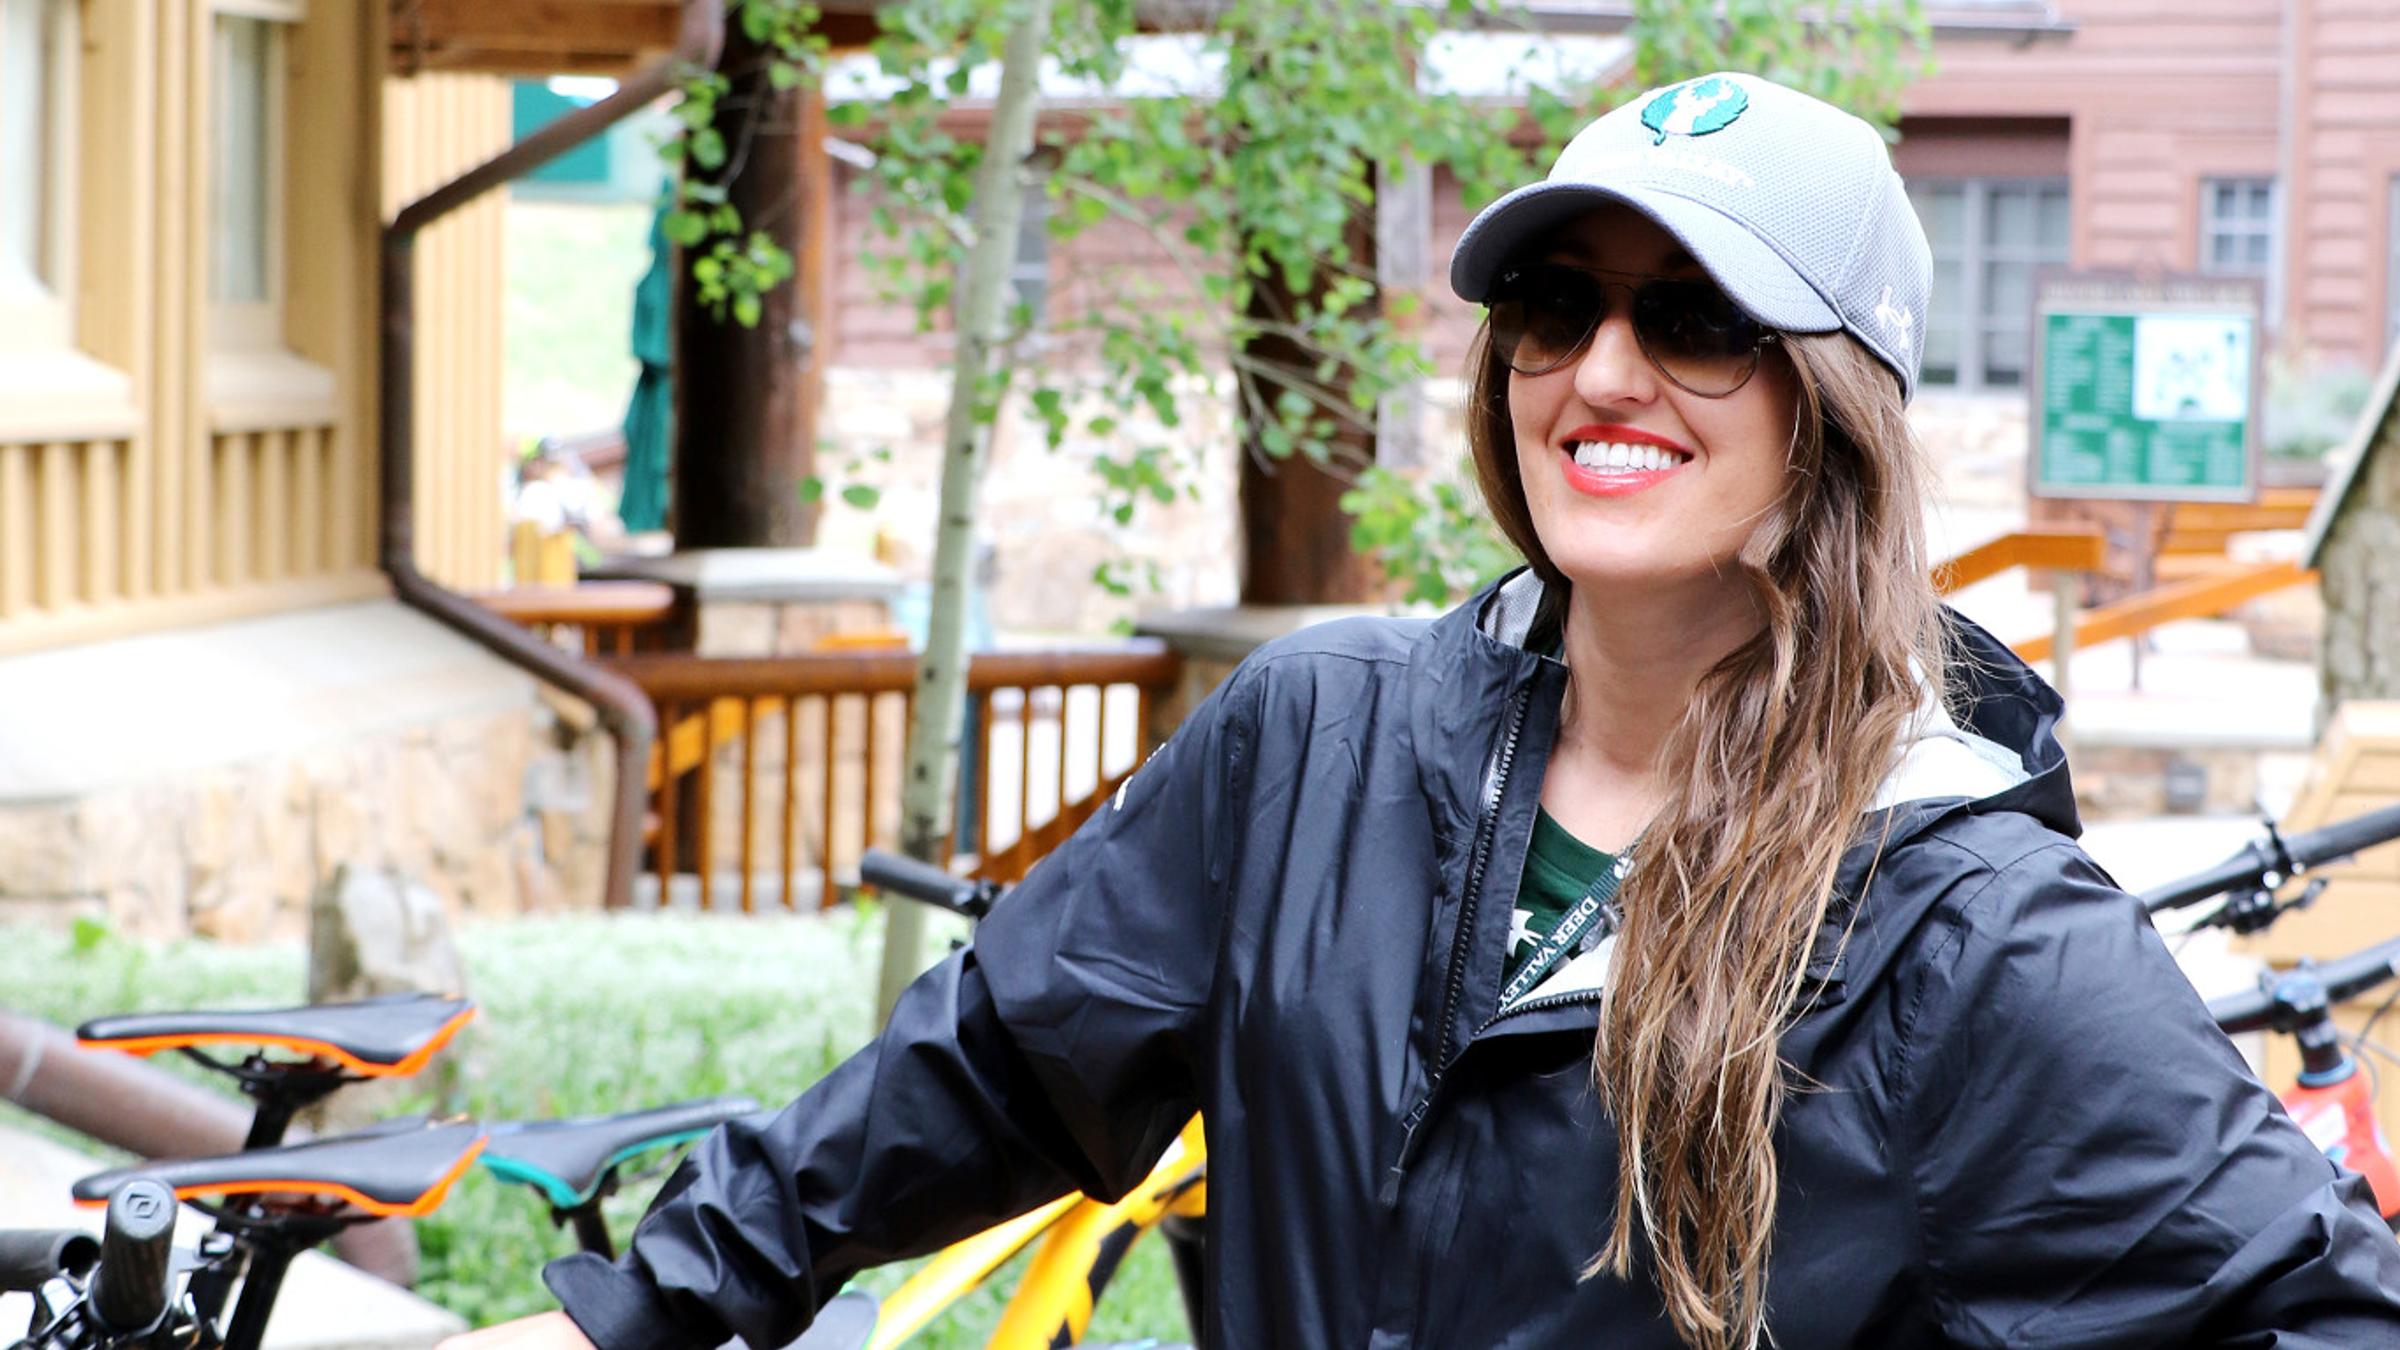 Deer Valley employee smiles with mountain bikes